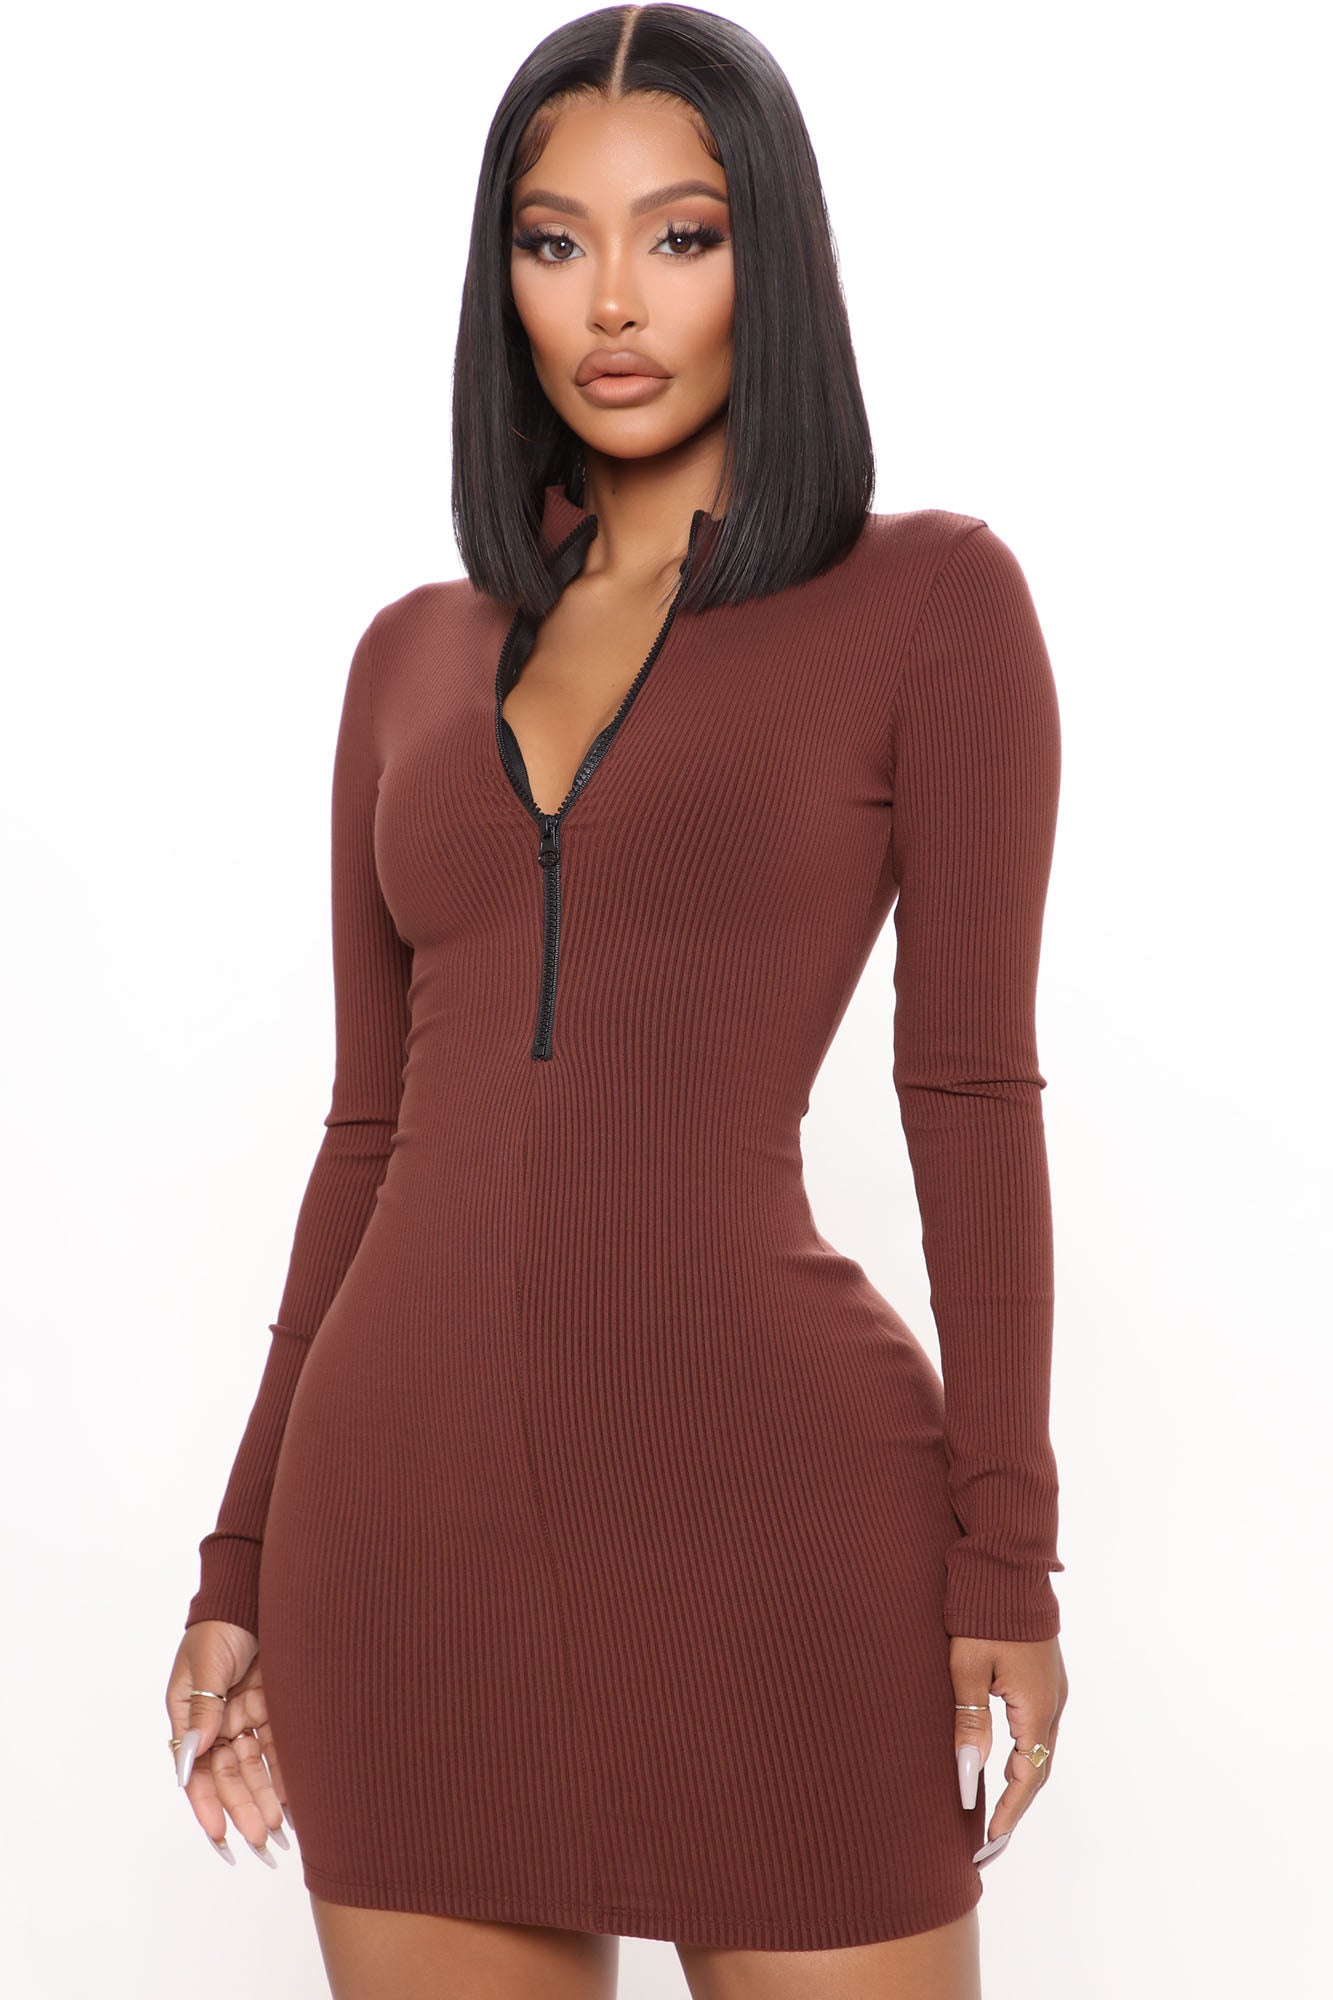 Fashion Nova - Have You Shopped The Snatched & Contoured Collection Yet? 🙌  Search: Brooklyn Snatched Mini Dress⁠ ✨www.FashionNova.com✨